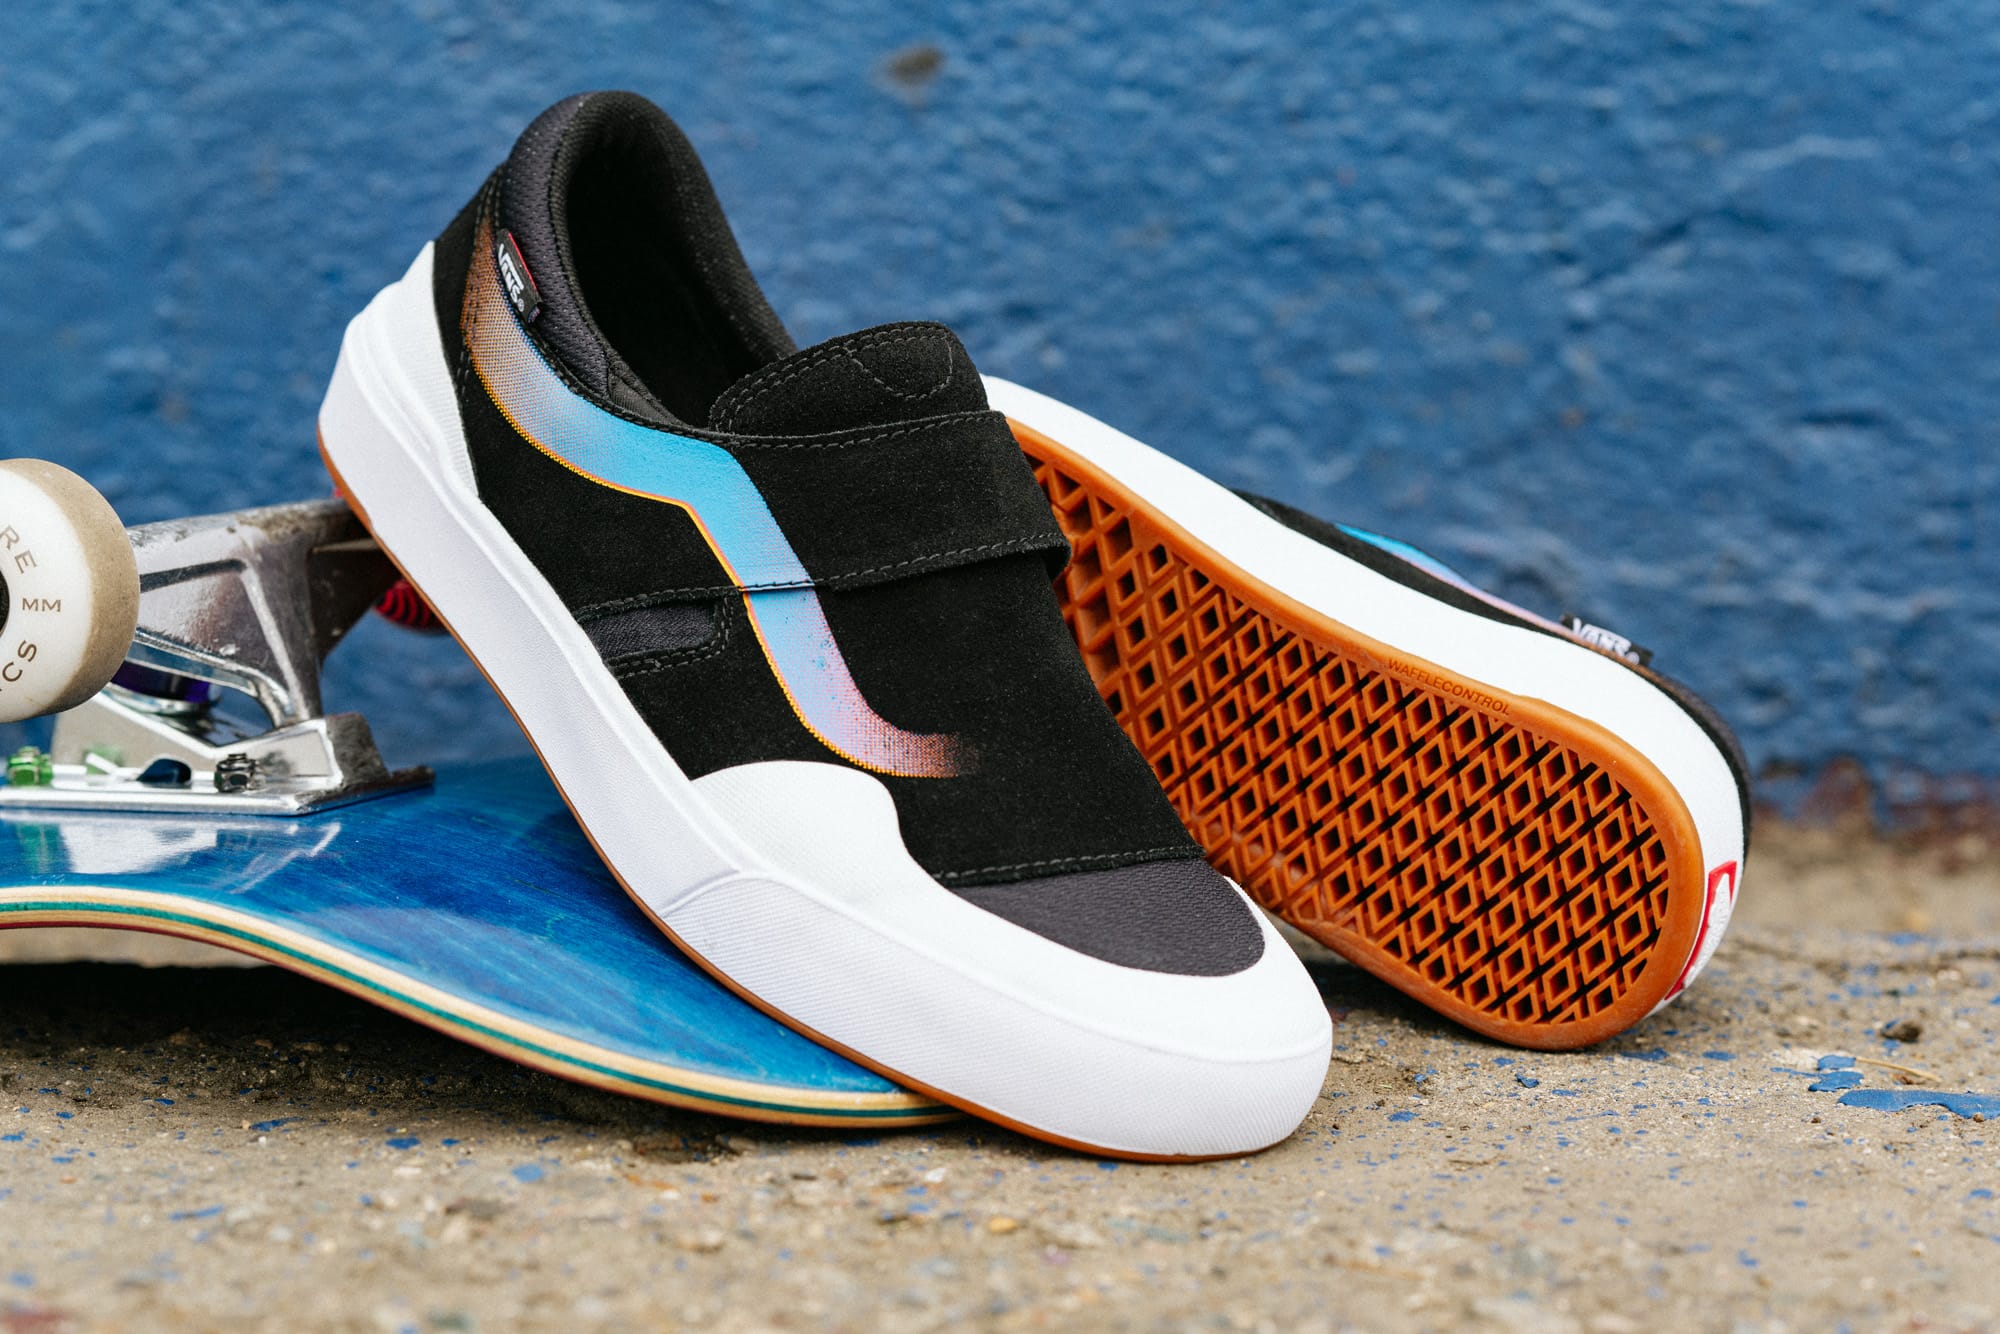 Vans Releases Slip-On Exp Pro Shoe With 